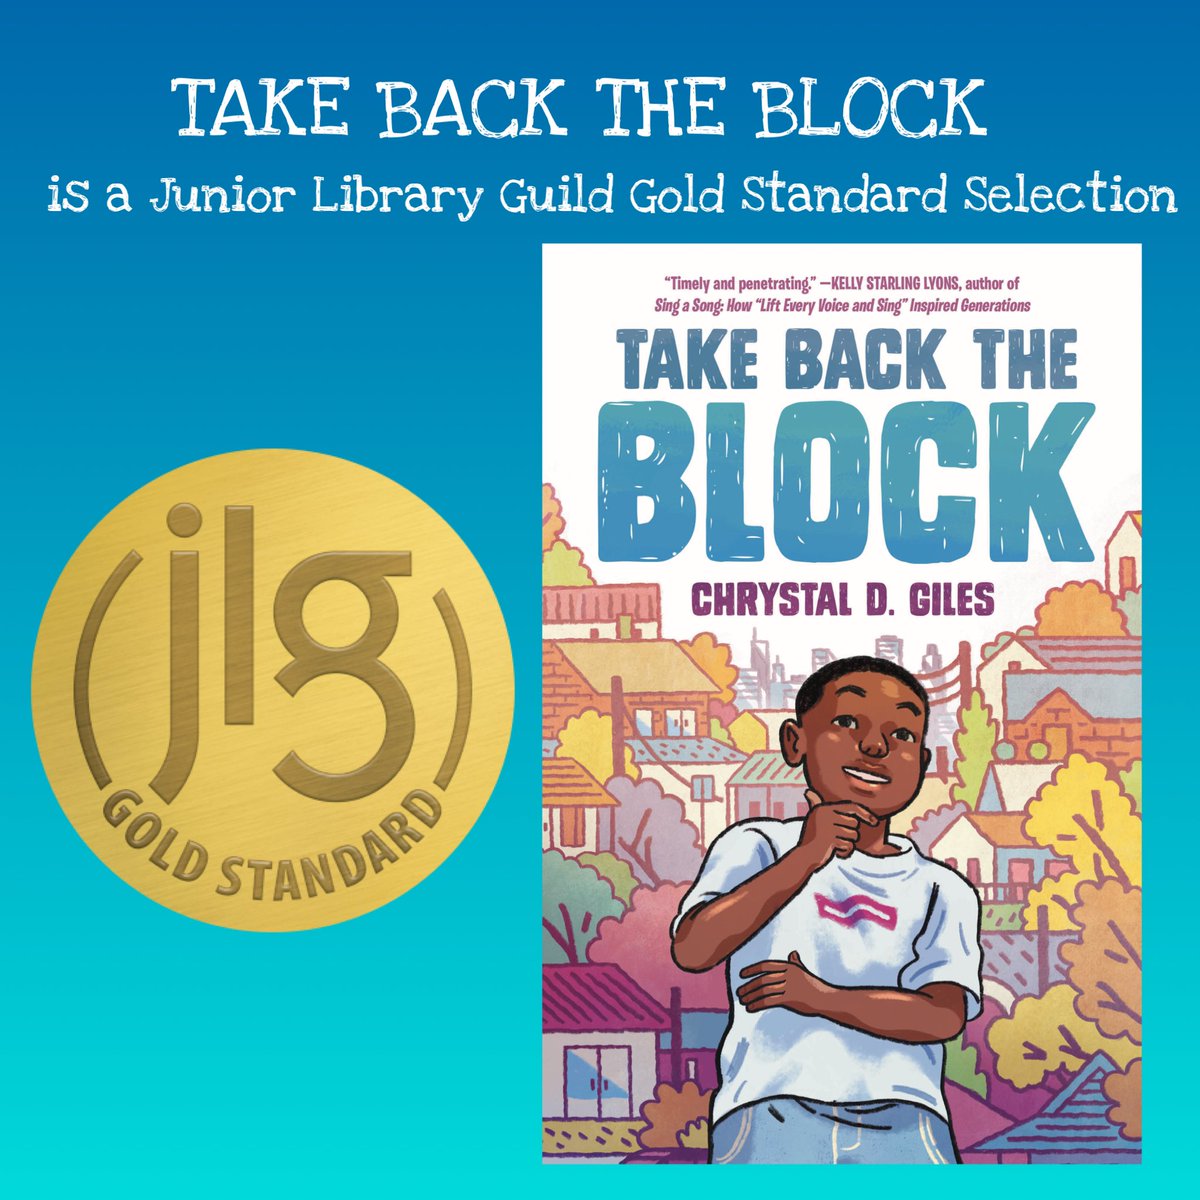 Honored to share that TAKE BACK THE BLOCK is a Junior Library Guild Gold Standard Selection✨ 

Thank you @JLGuild for this honor!

#TakeBackTheBlock #JLGSelection